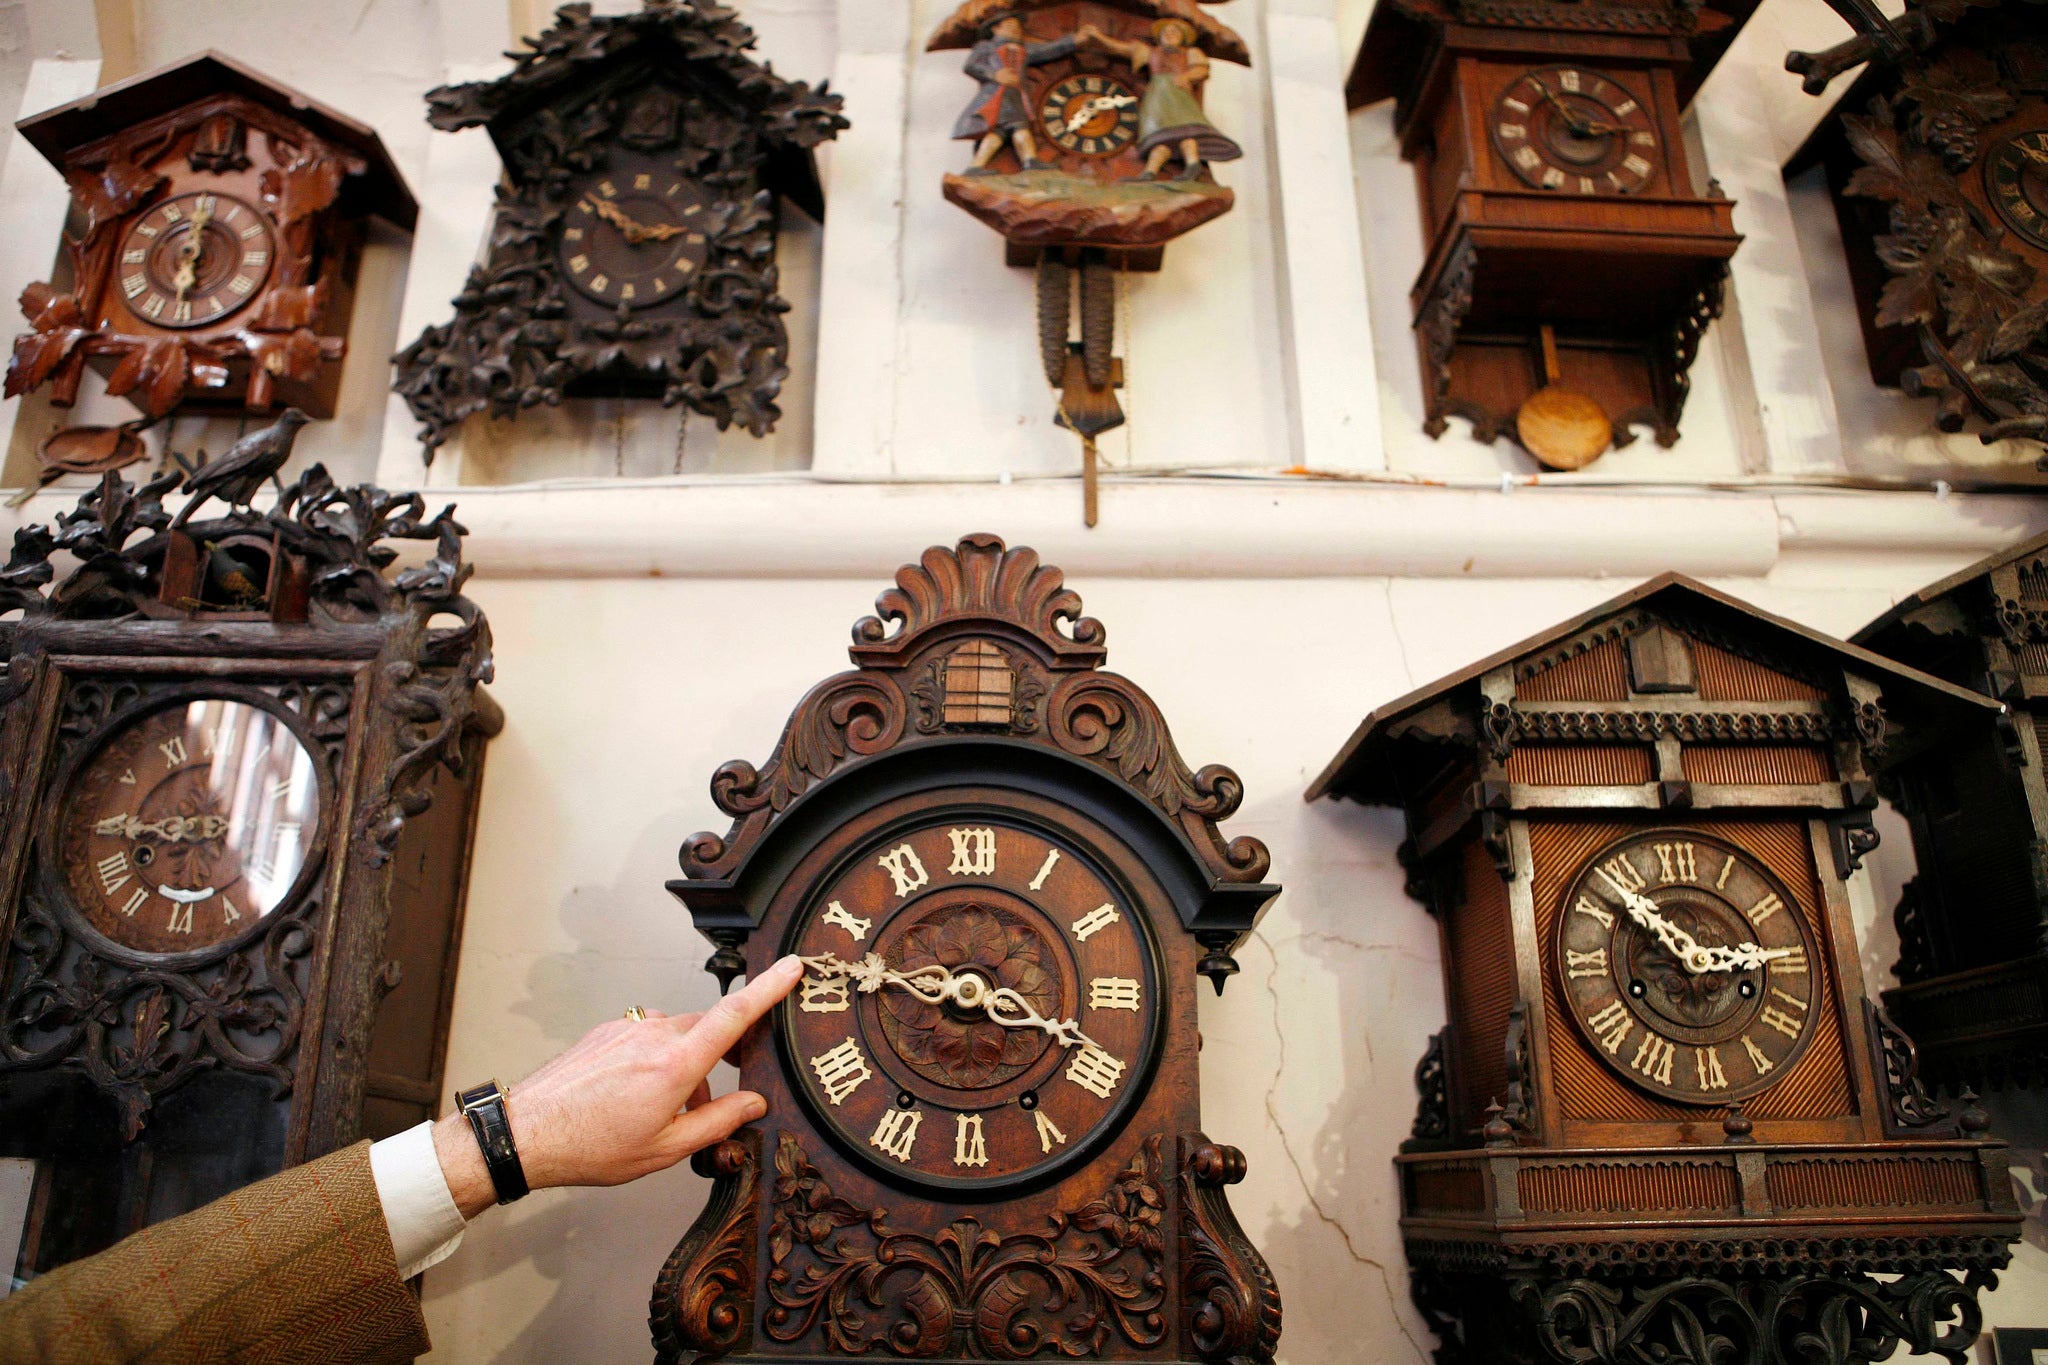 Roman Piekarski adjusts the hands on one of the clocks at Cuckoo Land, his cuckoo clock museum, near Knutsford in northern England, 2009. The museum takes two-days to turn its 600 clocks forward by one hour in preparation for the arrival of British Summer Time.